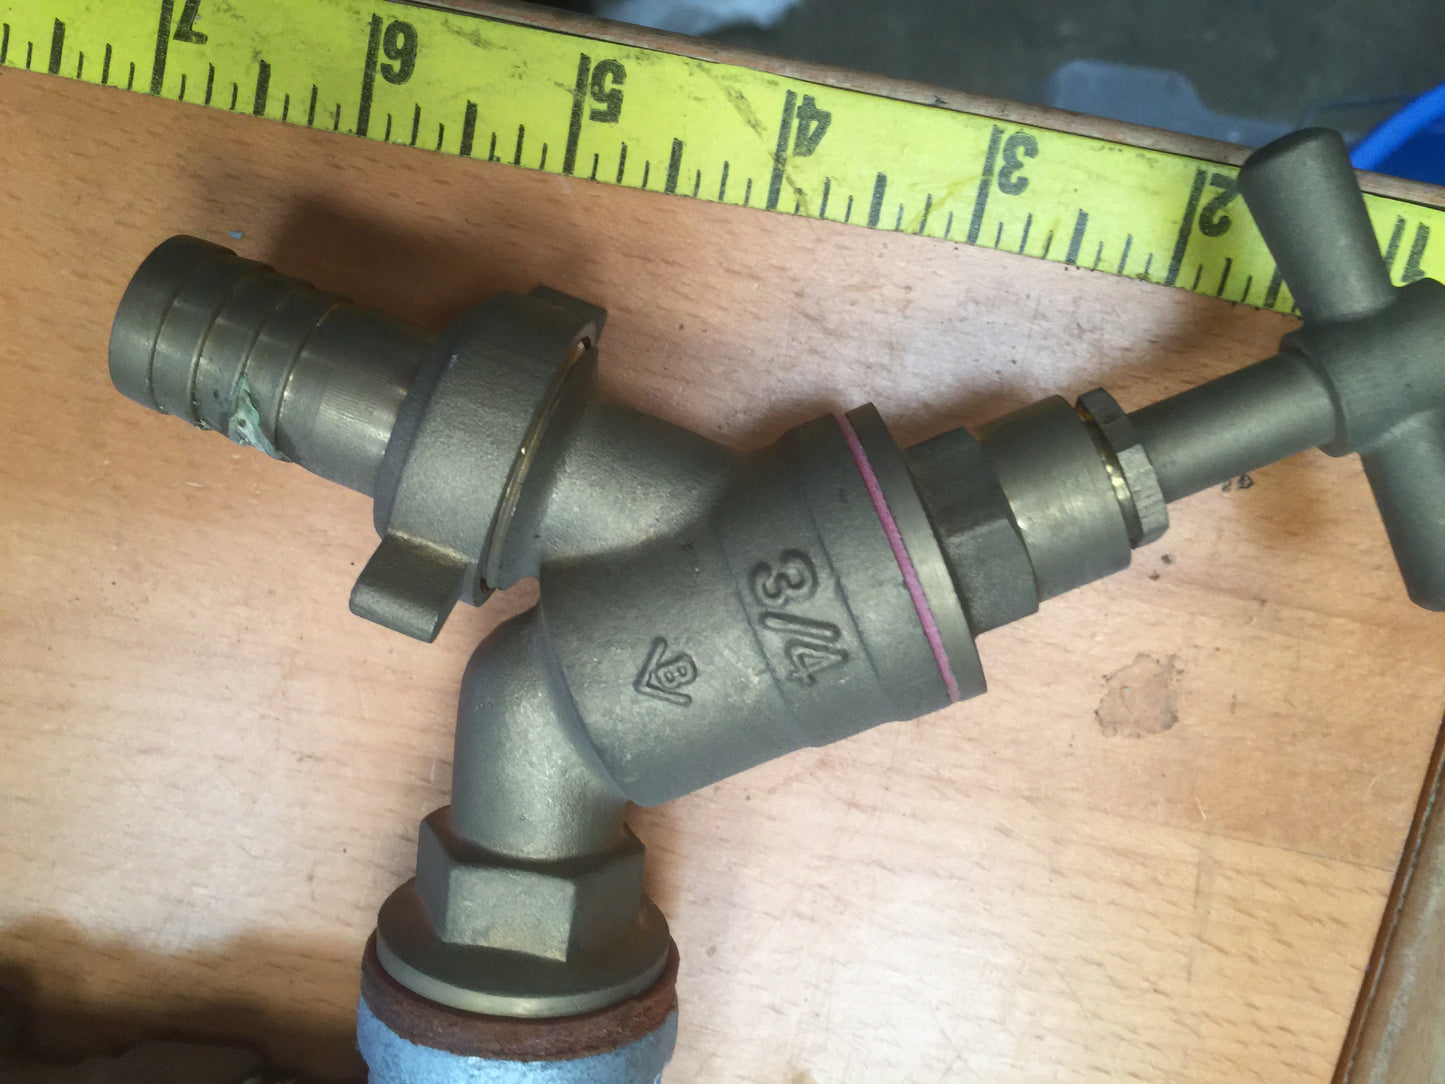 Fire Hydrant Stand Pipe Tap Water Supply 3/4" with Check Valve Horobin